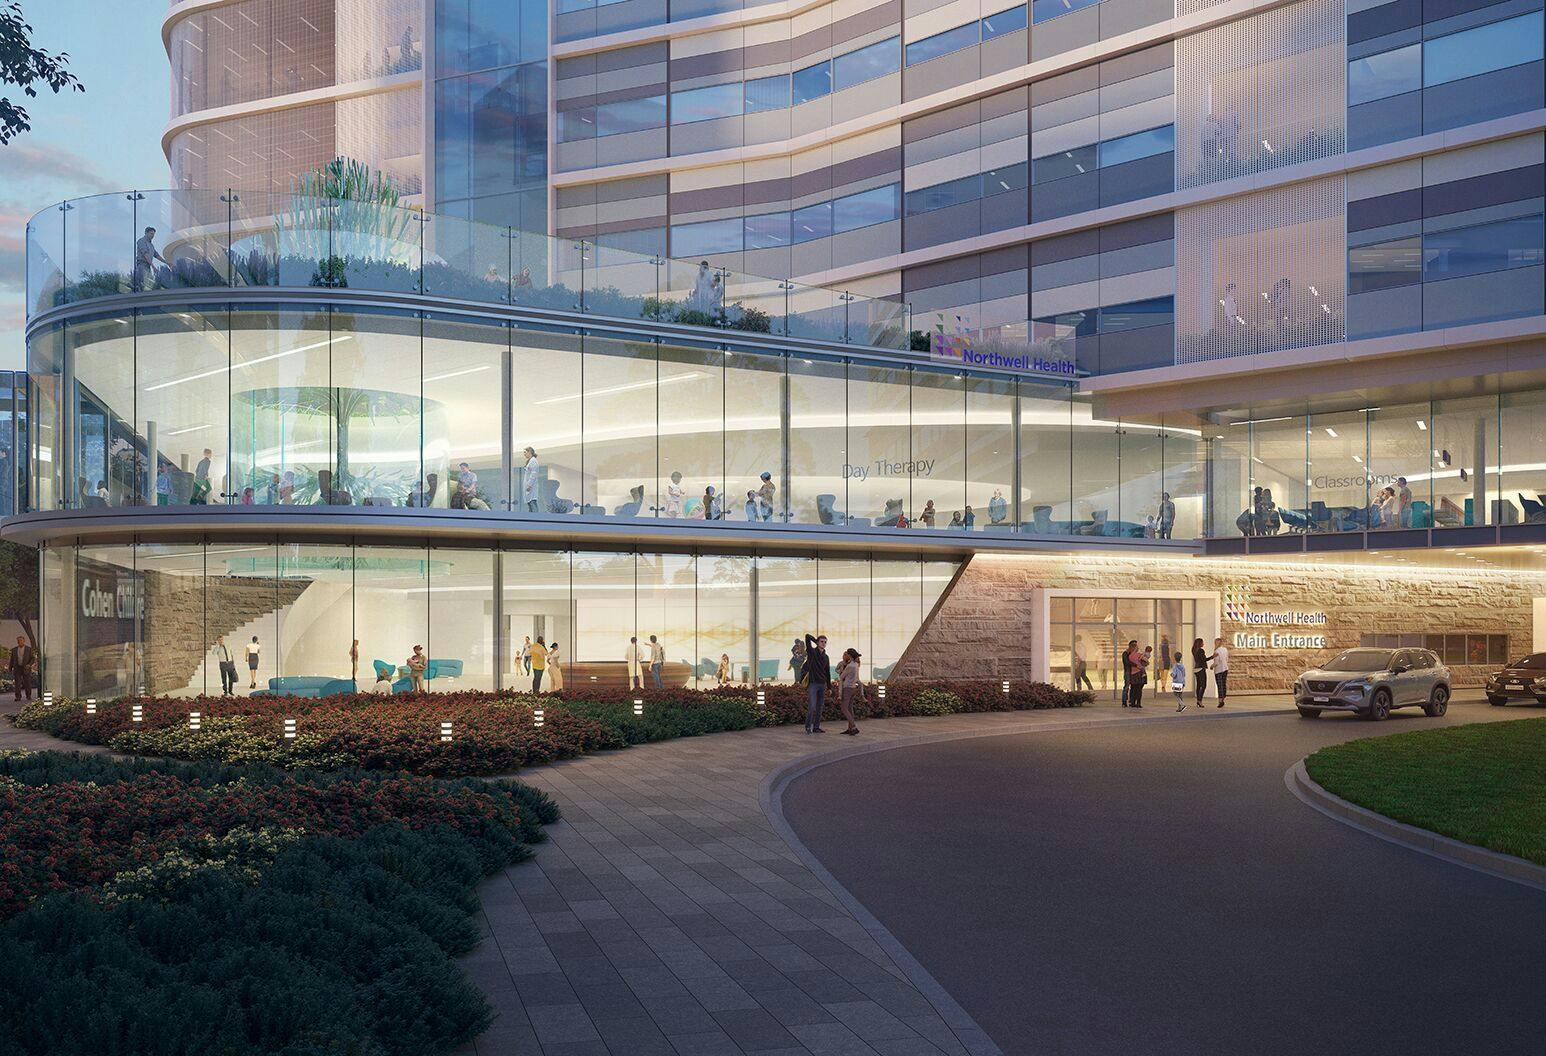 Northwell Health is planning to build a Child and Adolescent Mental Health Pavilion. It will be connected to both Cohen Children’s Medical Center and Zucker Hillside Hospital. (Image: Northwell Health)